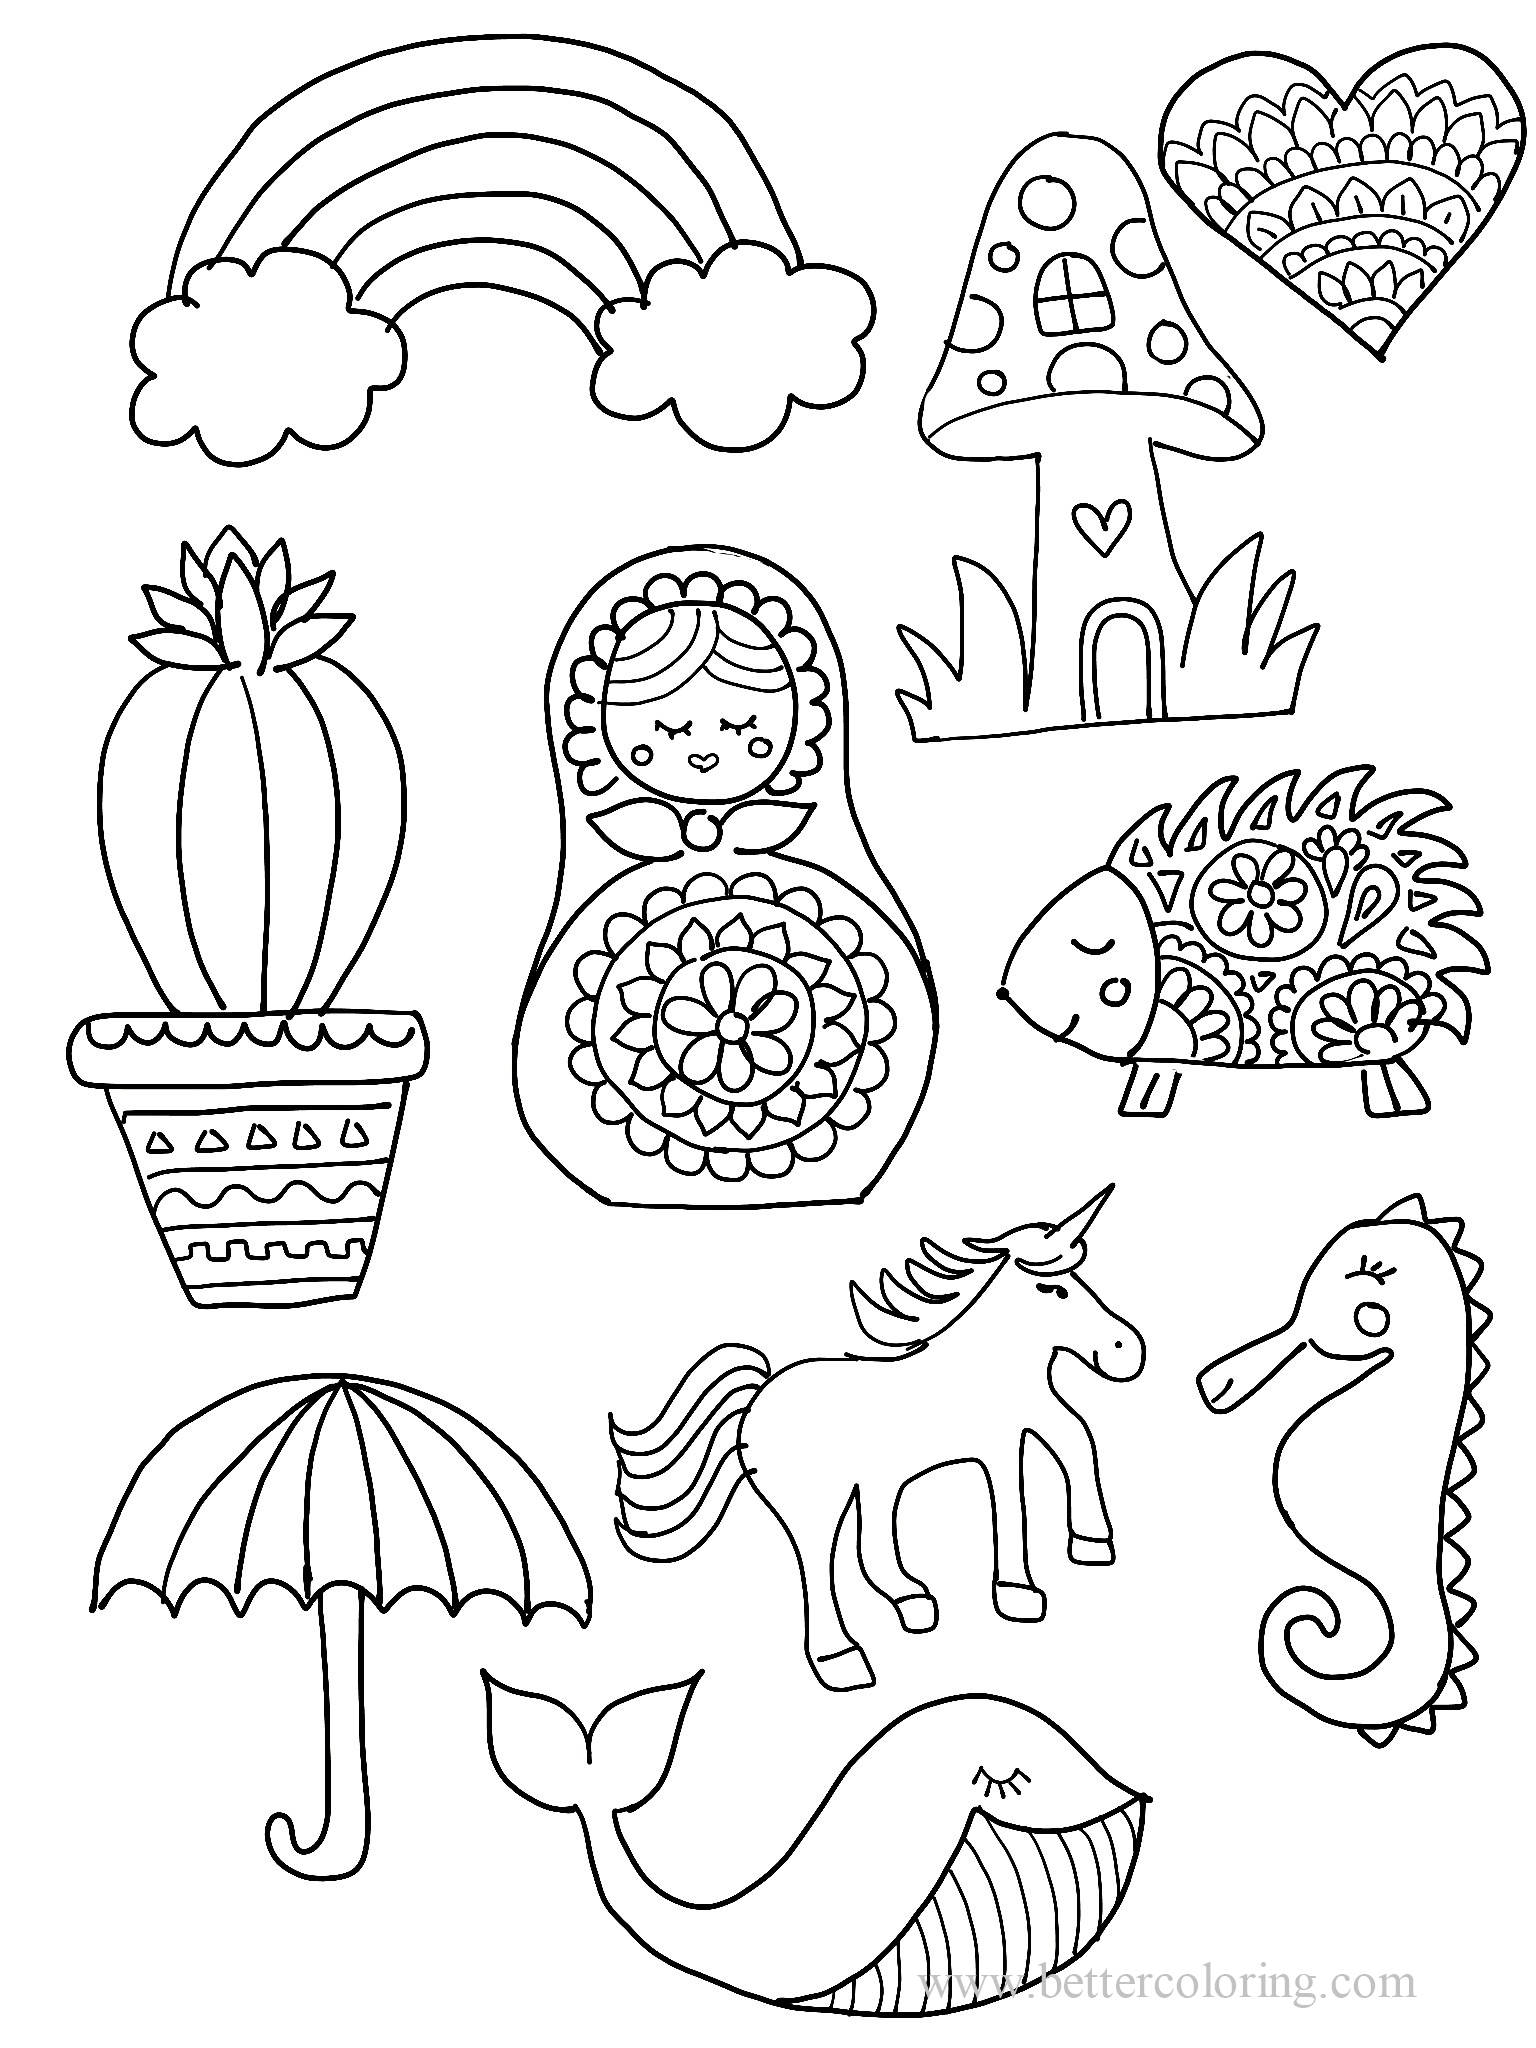 Sharpie Icons Coloring Pages - Free Printable Coloring Pages